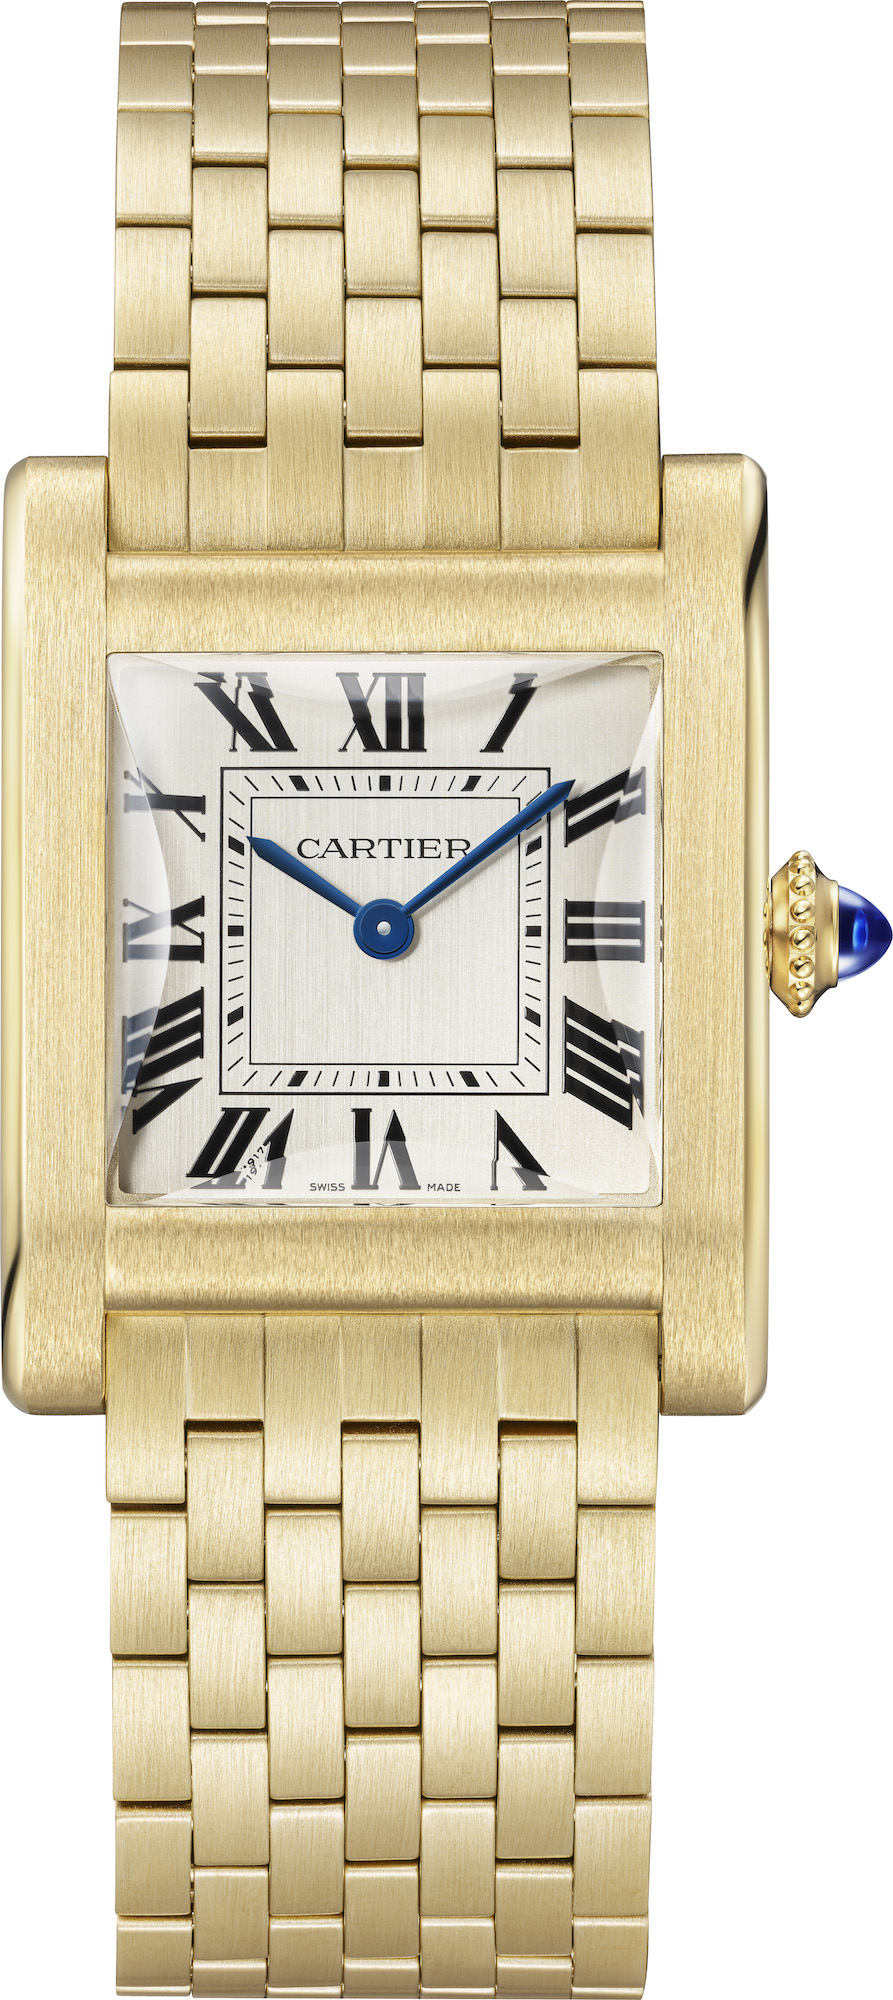 TANK NORMALE CARTIER PRIVE